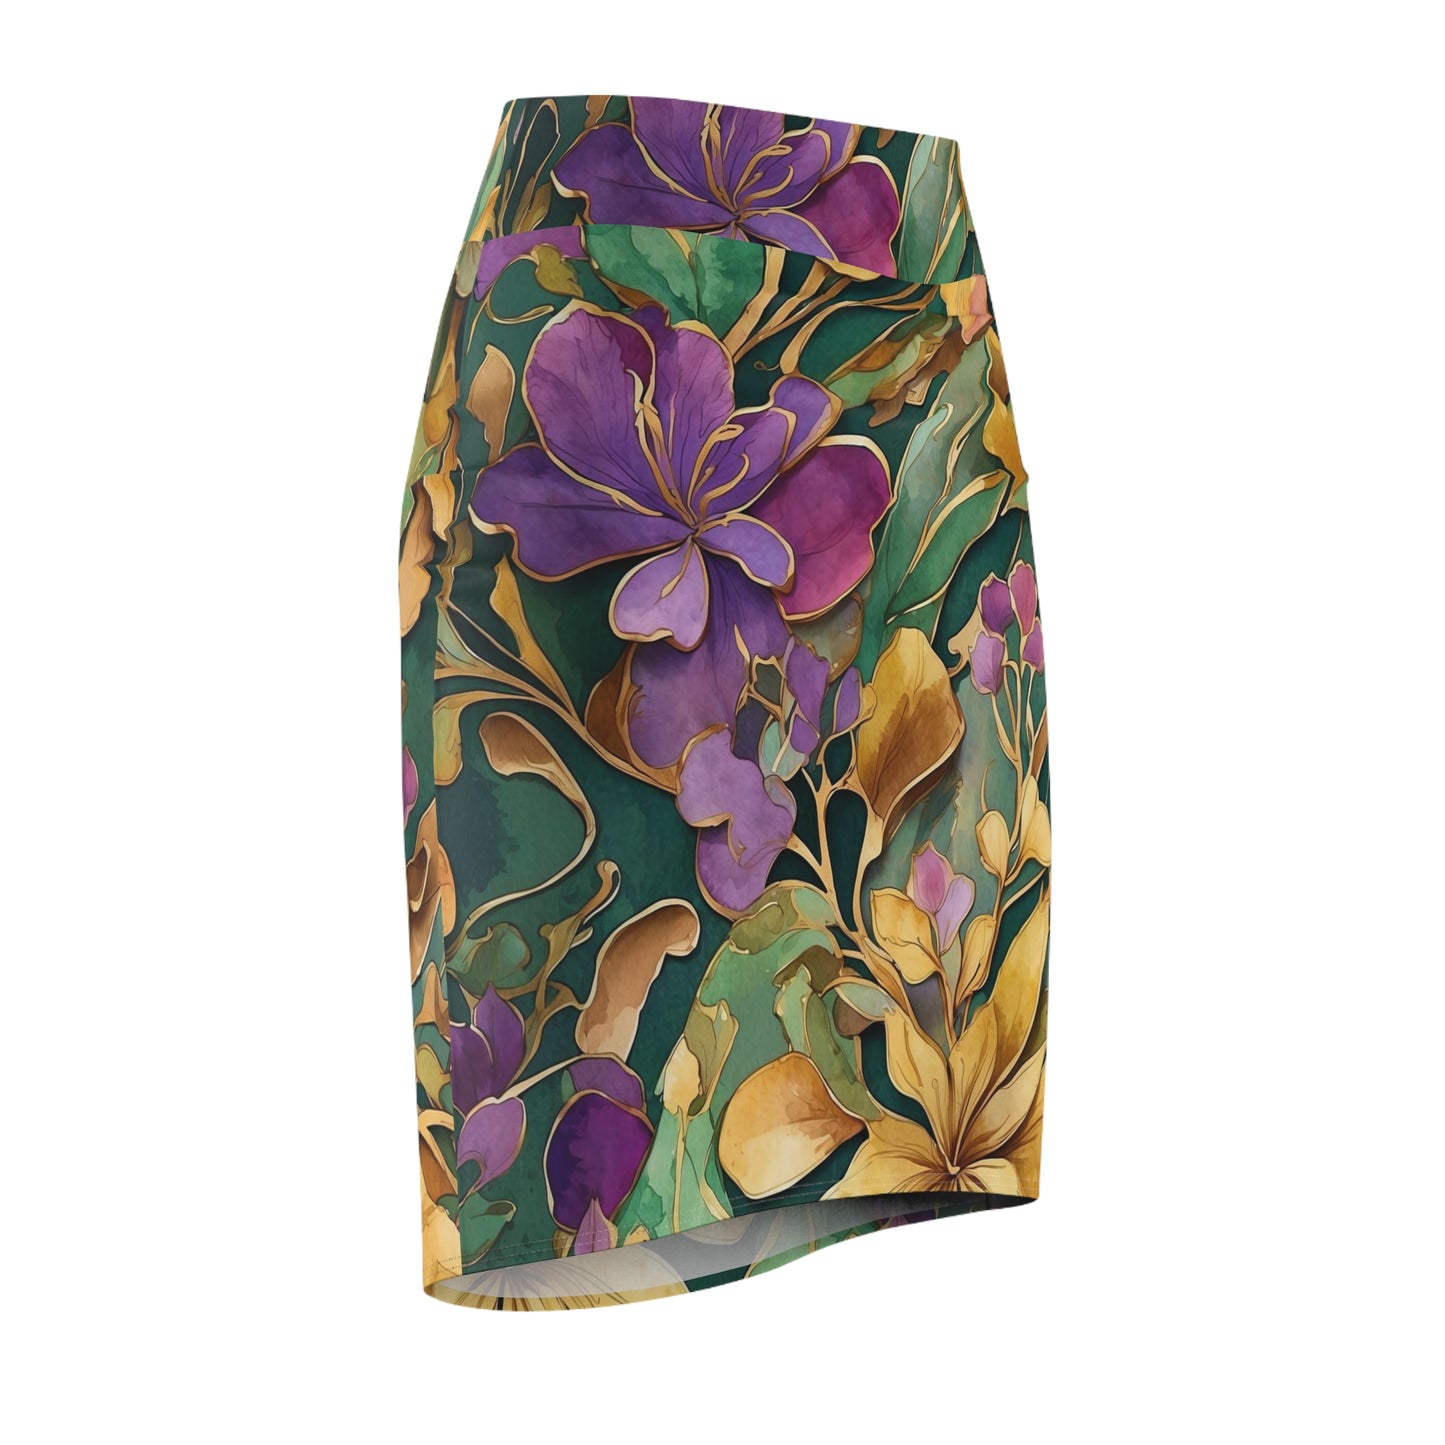 Sophisticated Mardi Gras Floral Skirt, Women's Pencil Skirt, Abstract Purple Green Knee Length Stretch Skirt for Office Casual or Costume